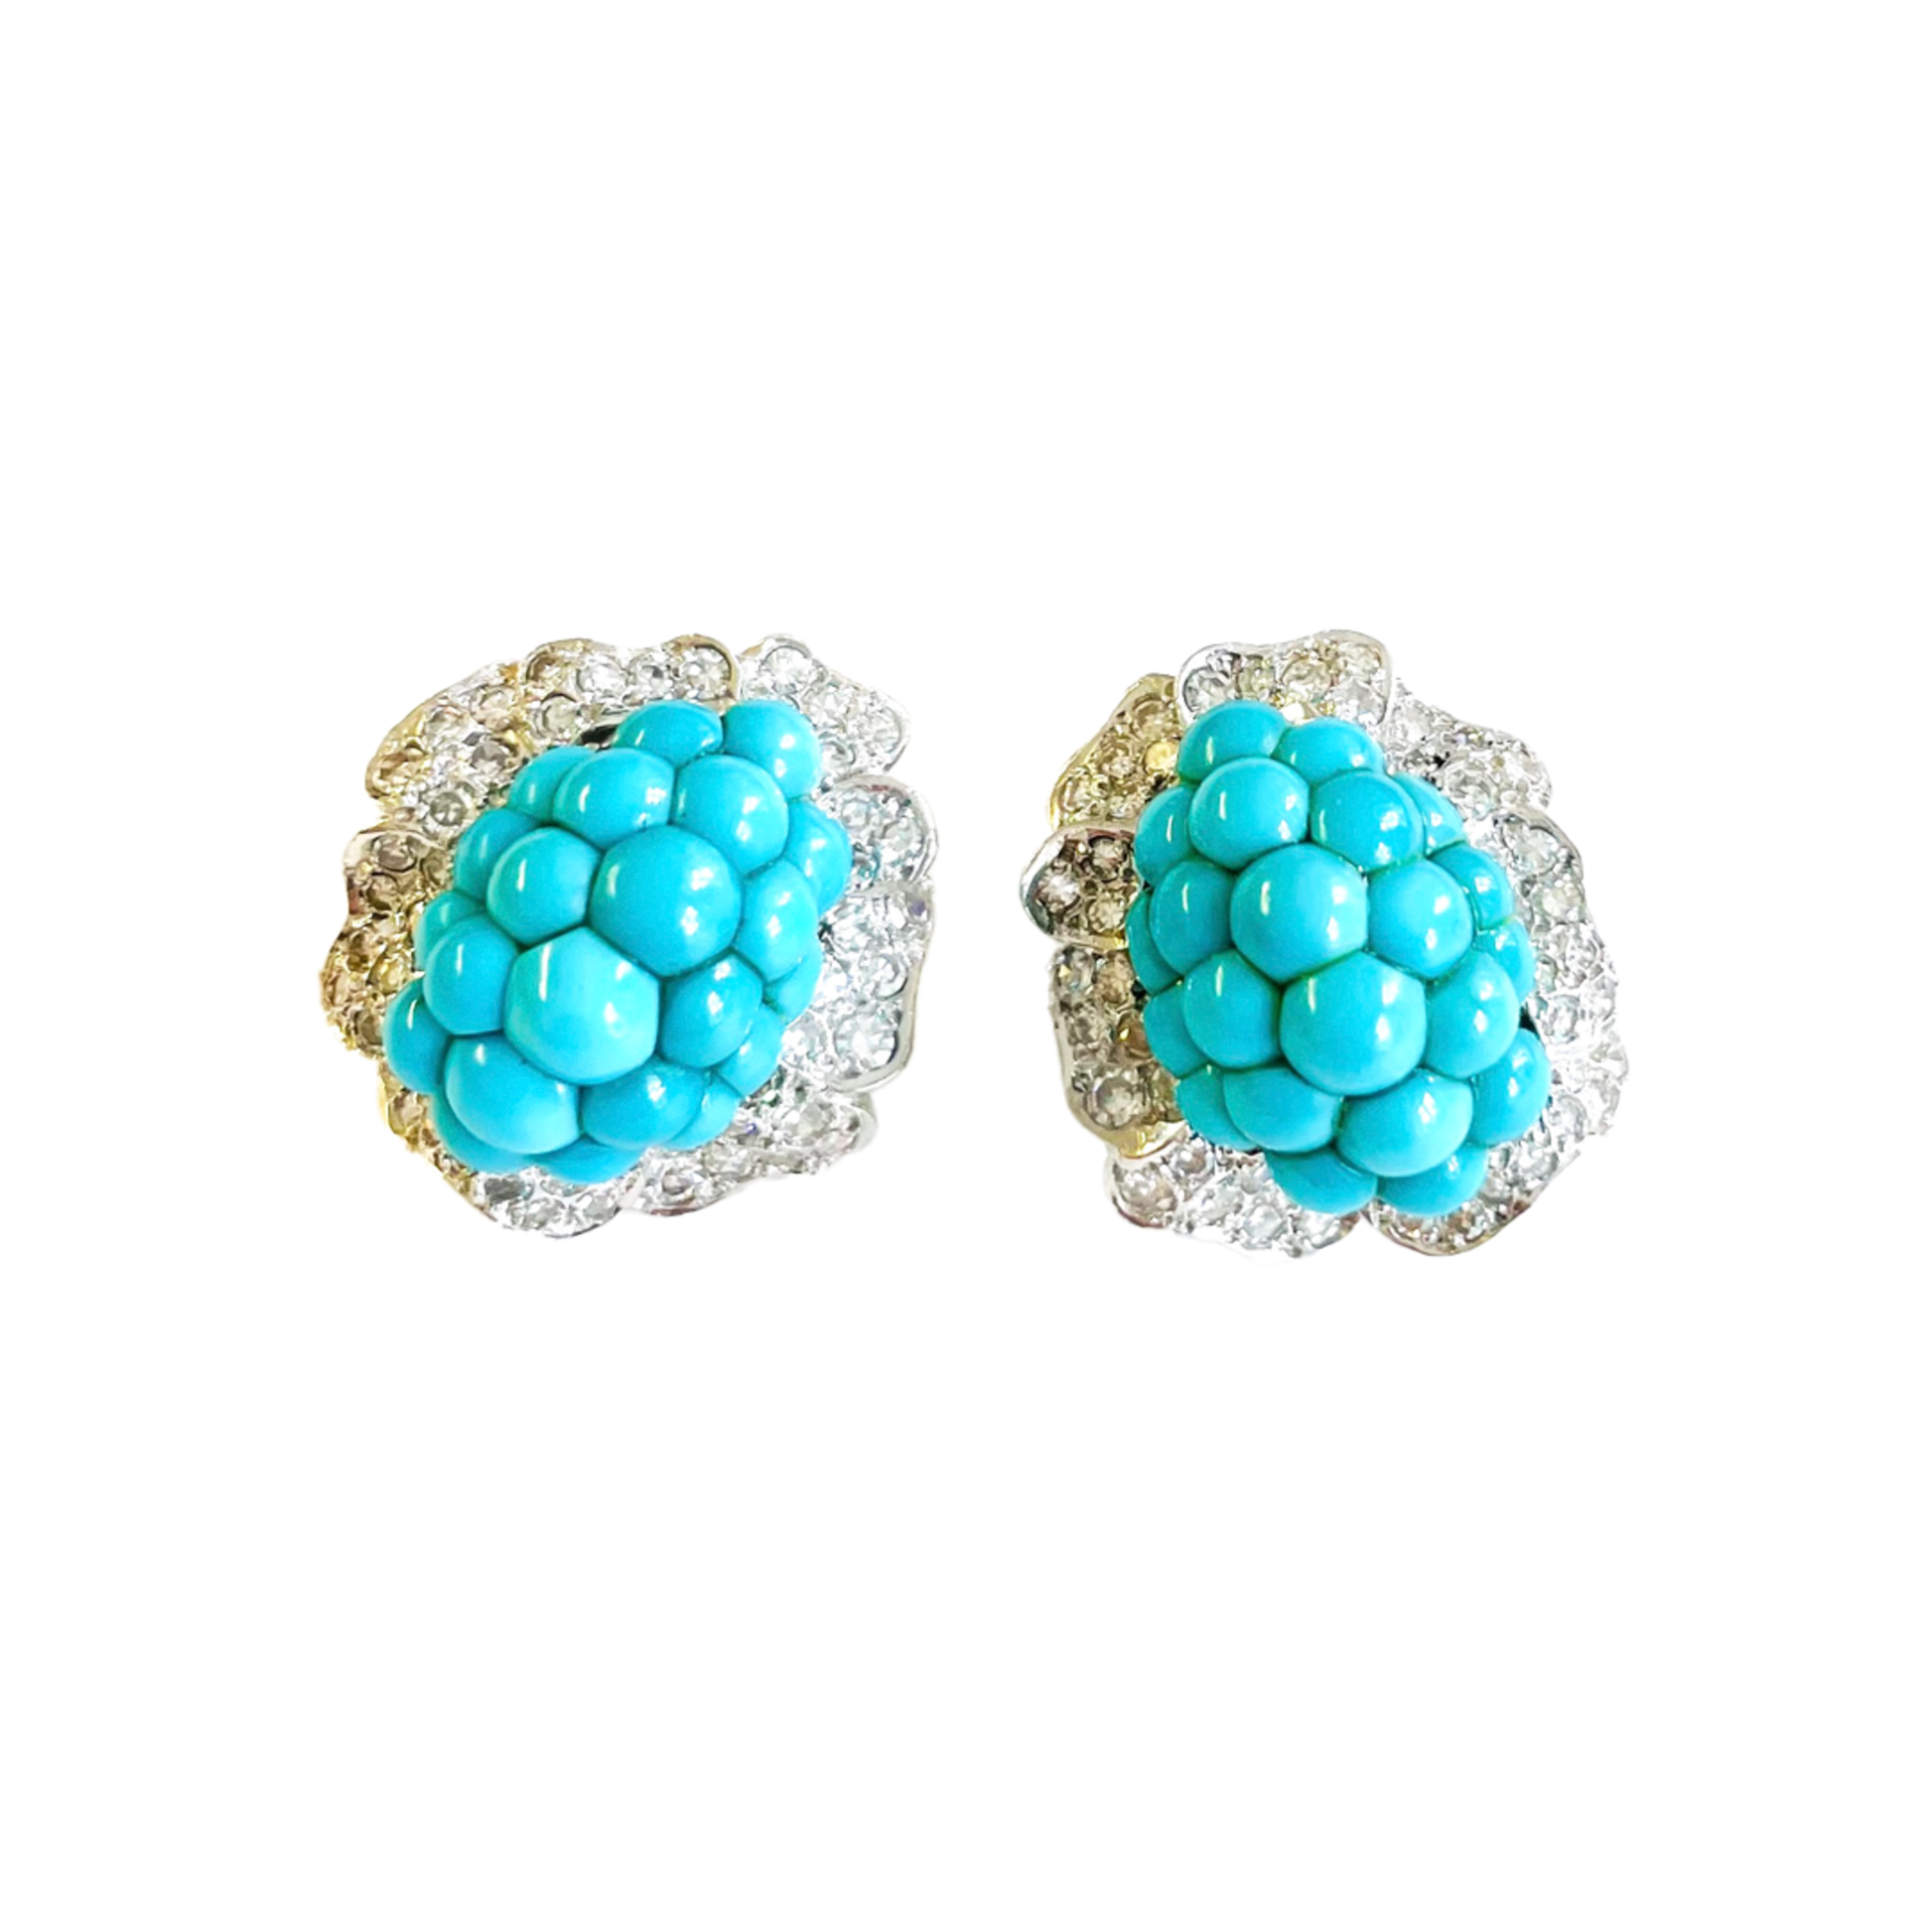 Wilm German 1950s Platinum Turquoise & Diamond Cluster Earrings front view